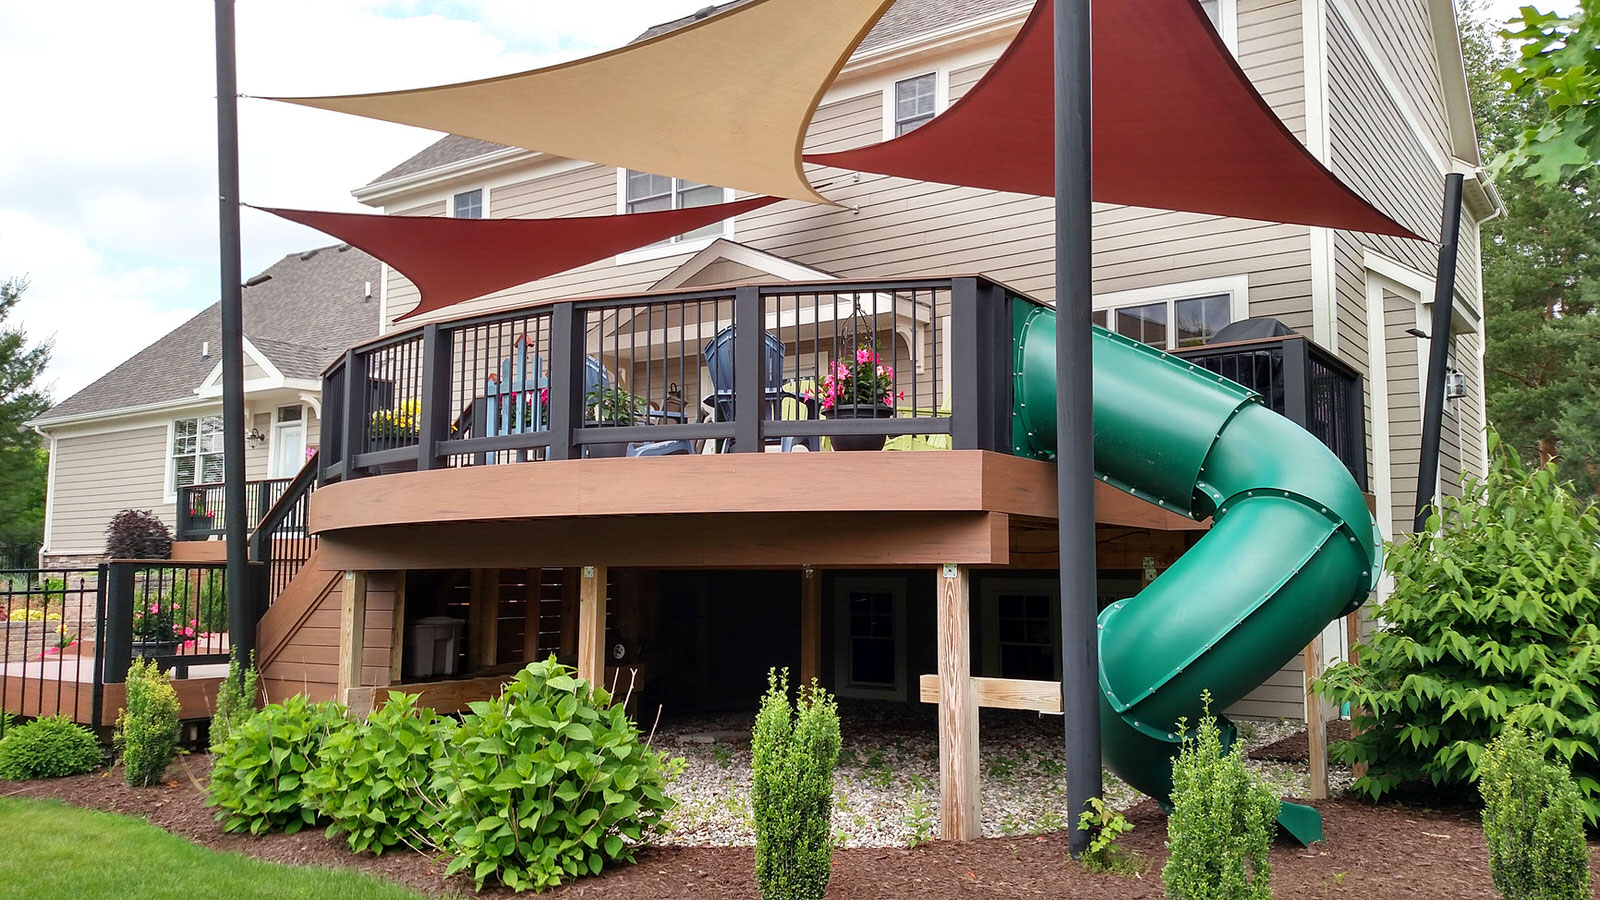 A custom deck contractor project from Signature Decks & Construction. A deck with a kids slide attached to the side.